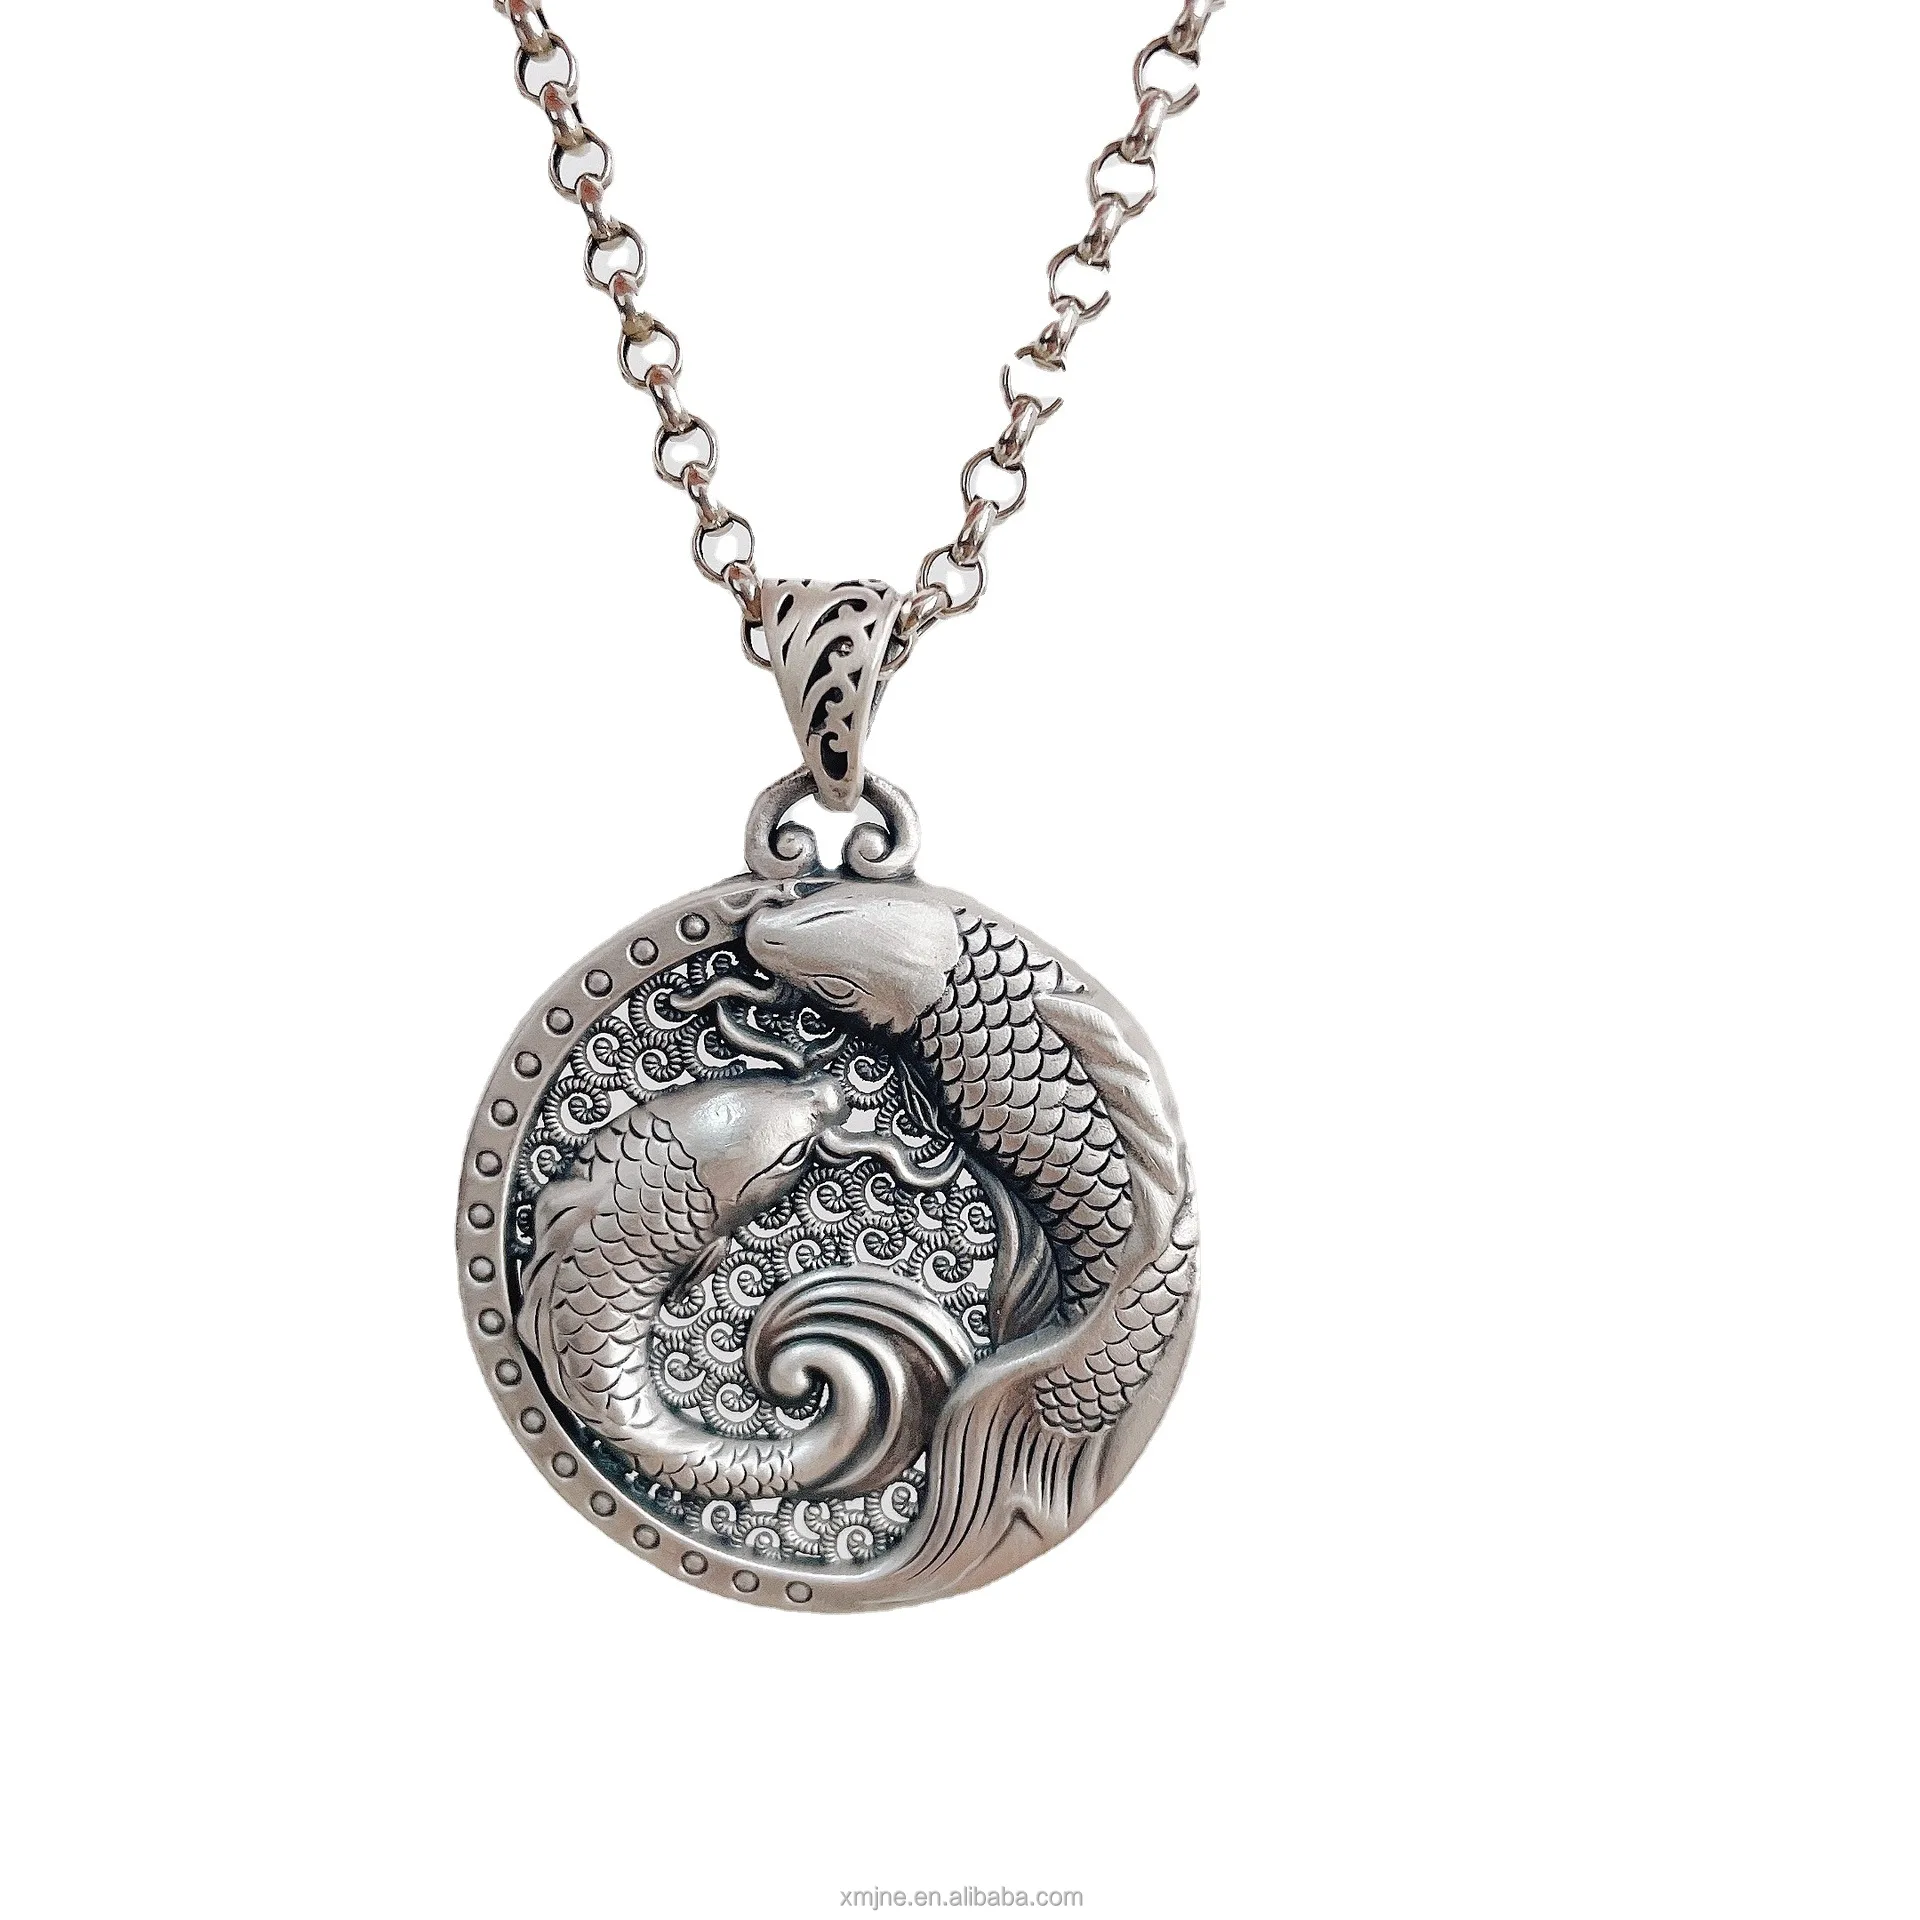 

Certified S999 Filigree Twin Fish Pendant Antique Sterling Silver Women's Ethnic Style Hollow Sand Old Carp Chain Key Chain